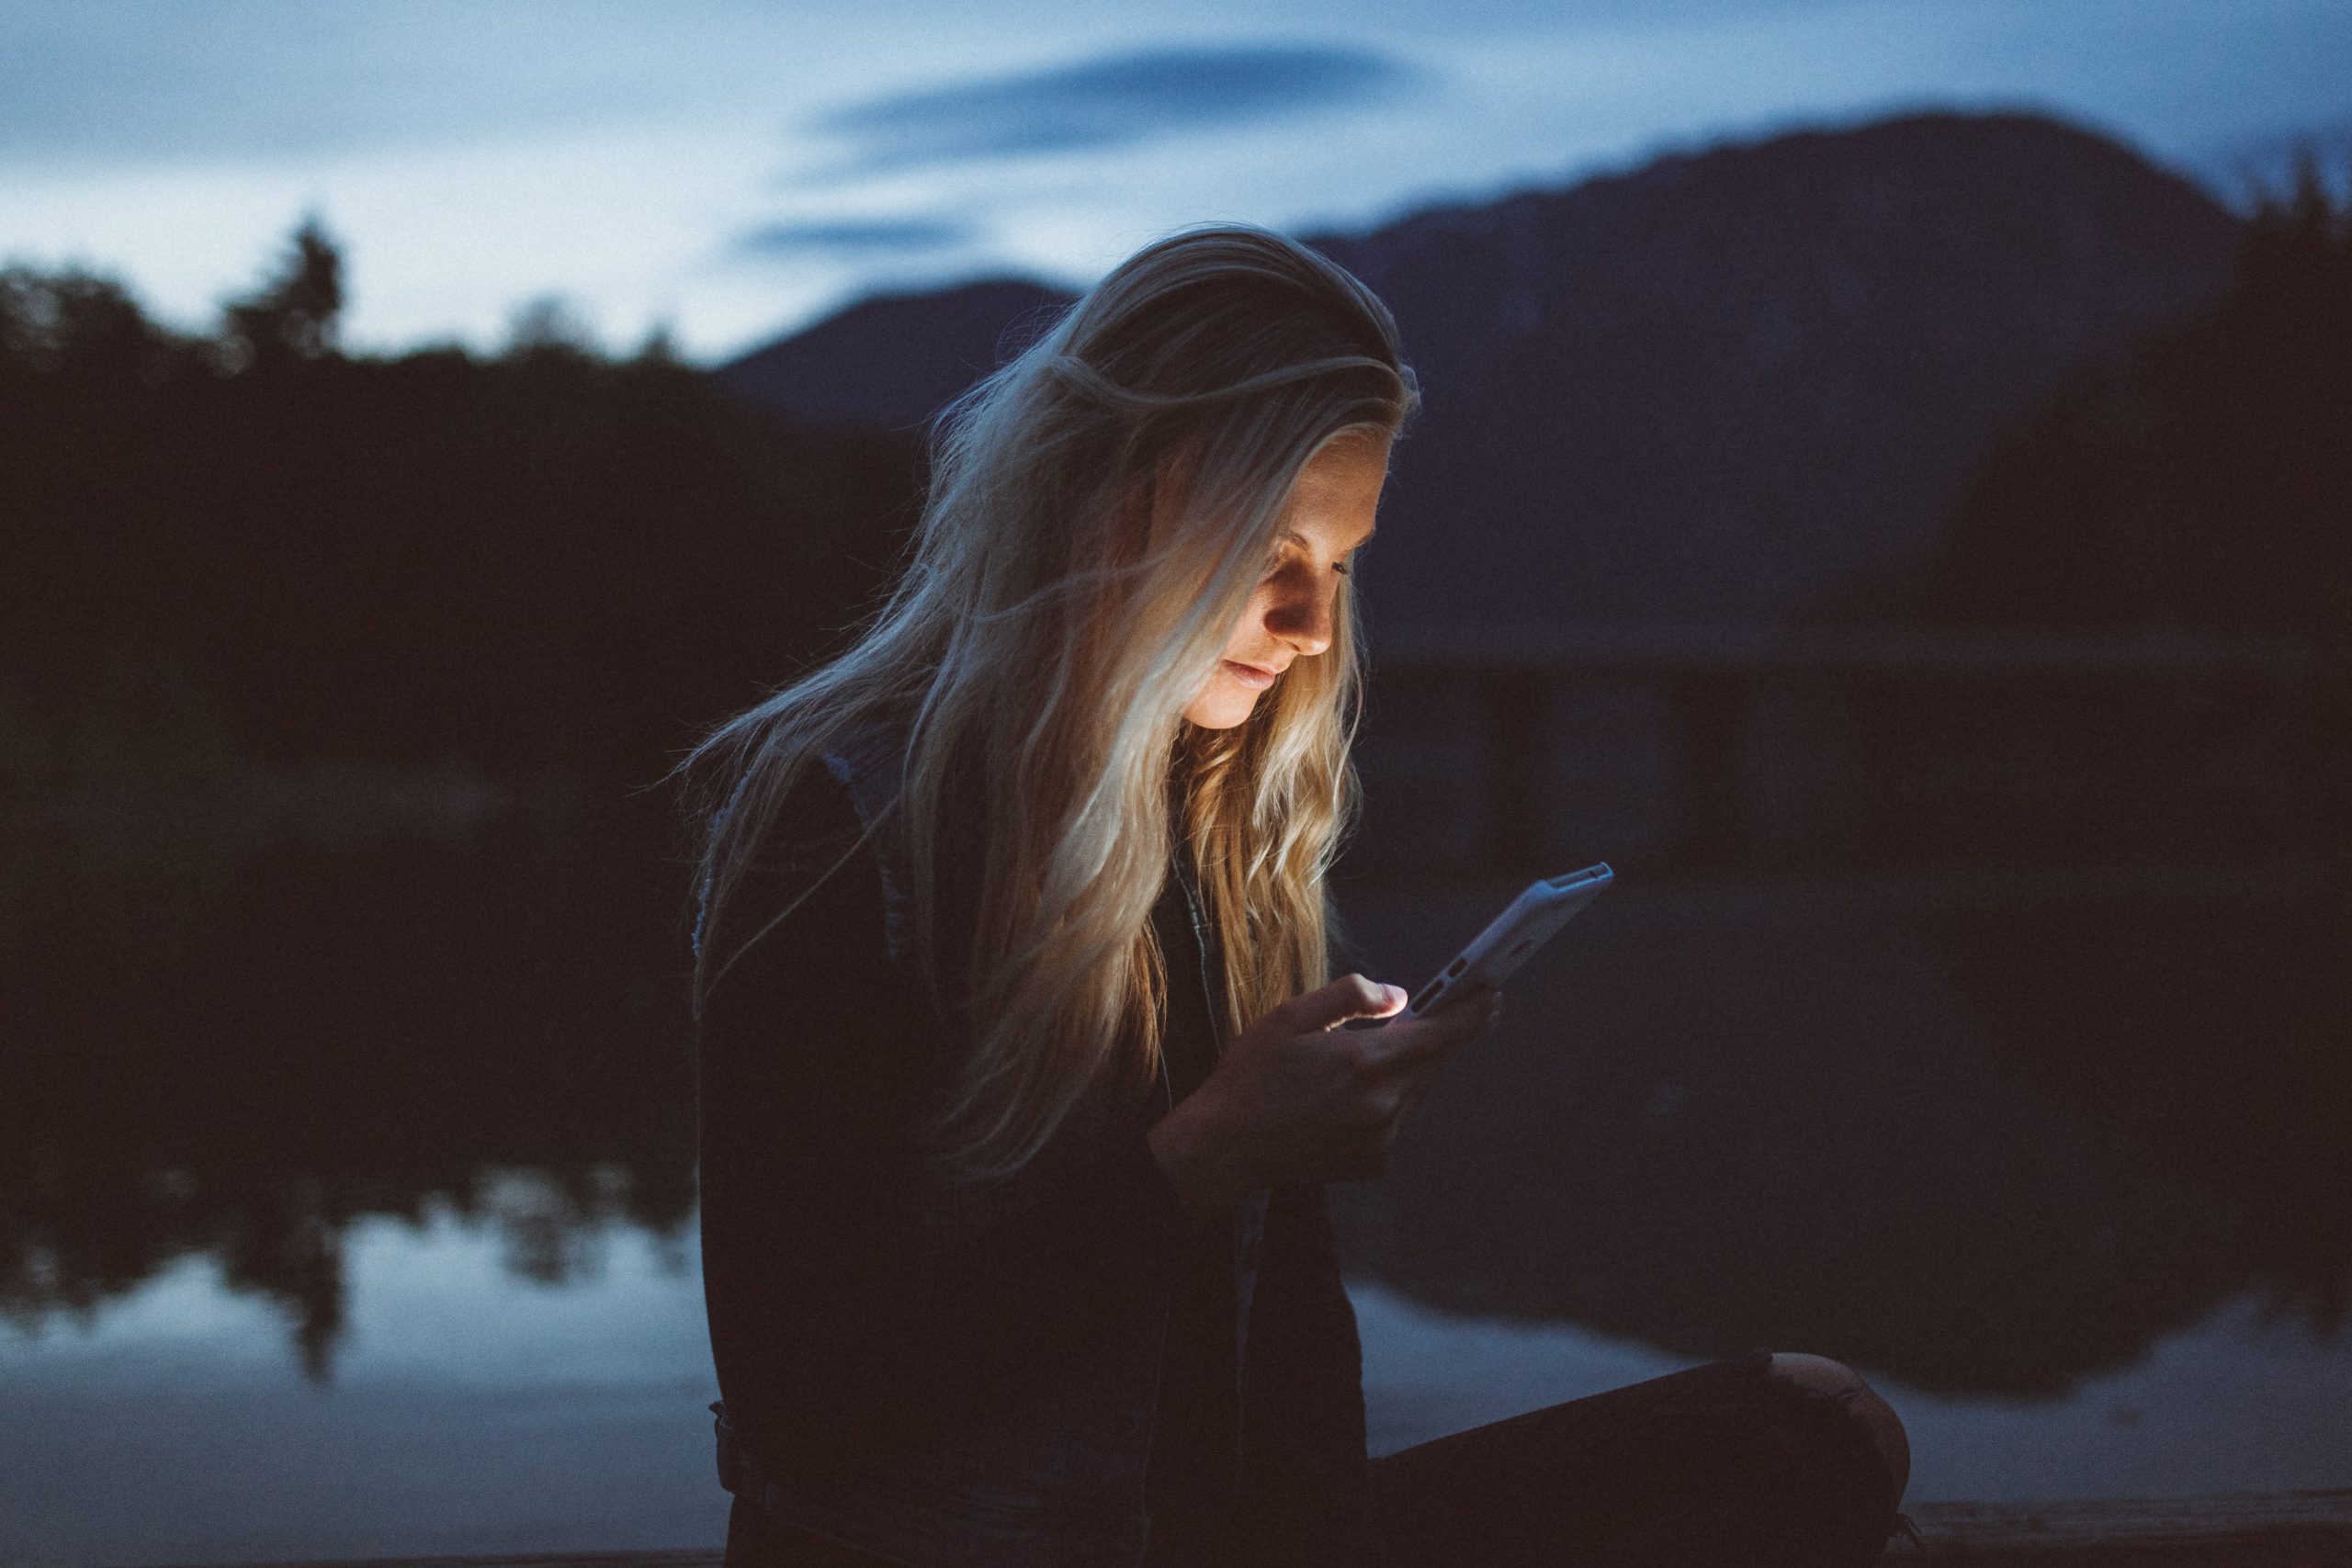 A young white woman with long blond hair looks at a phone, her face illuminated by its glow. She stands in a natural area with a lake and mountains. (Photo by Becca Tapert on Unsplash) 